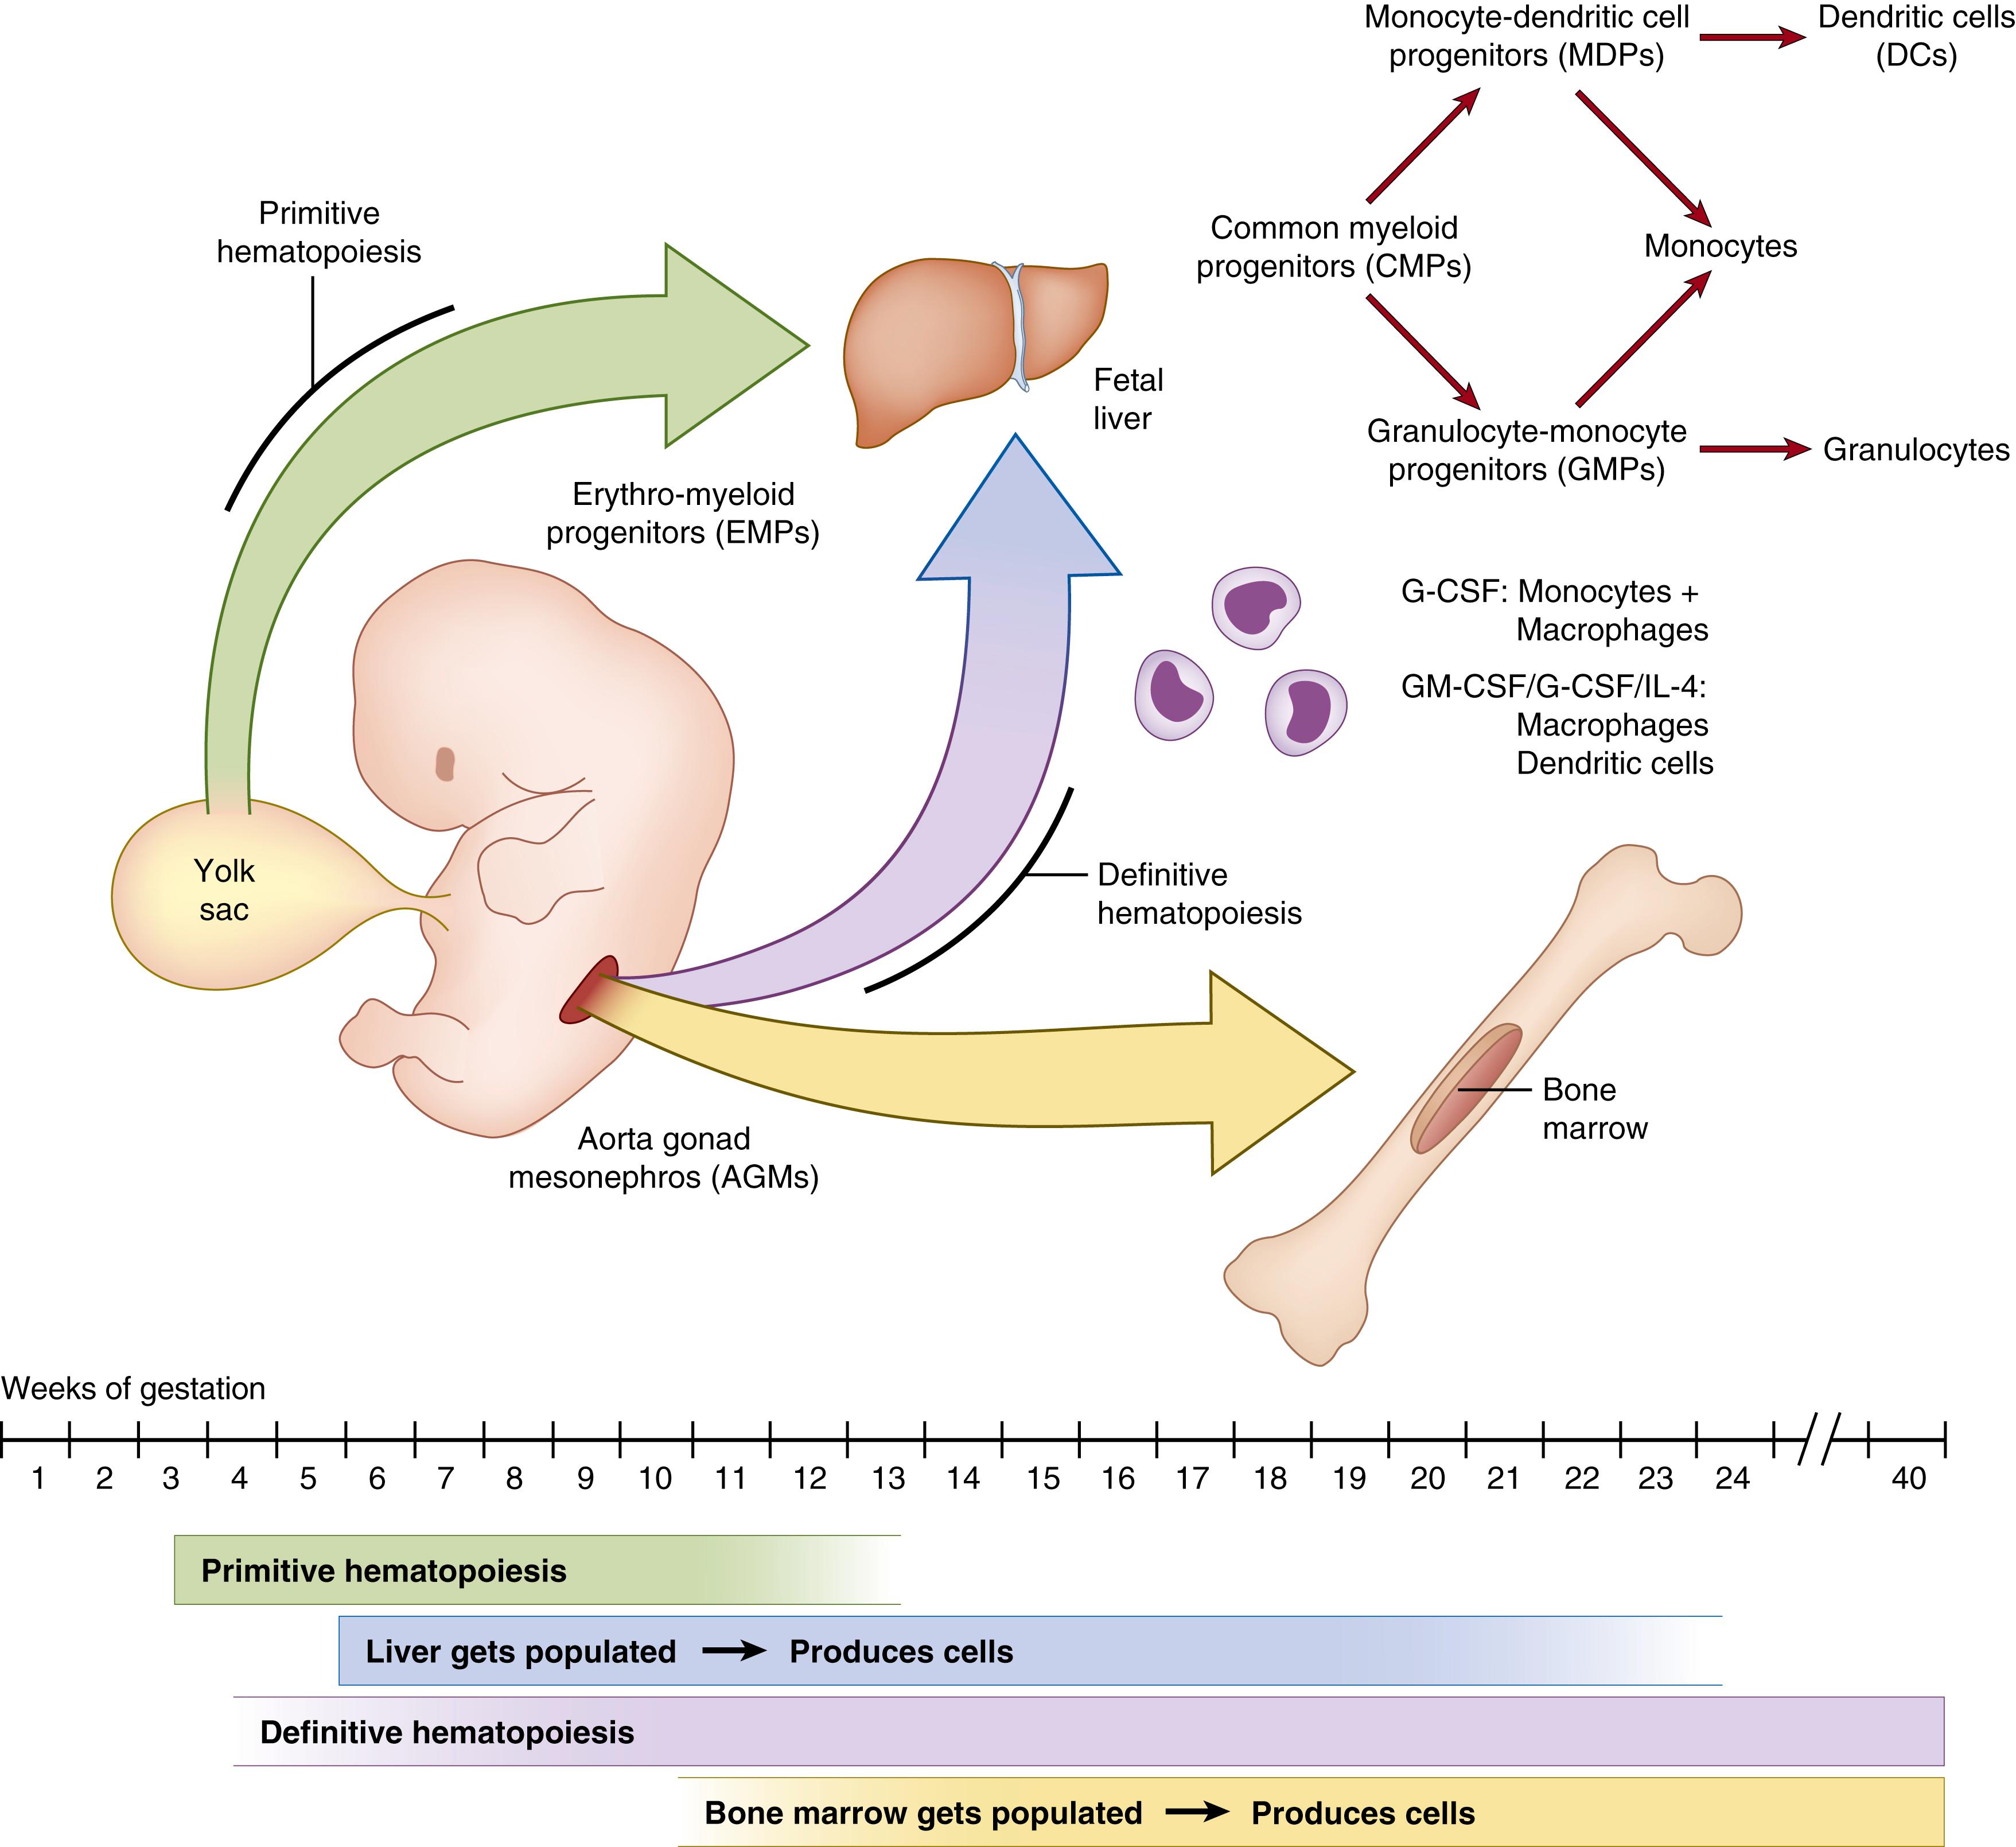 Fig. 118.1, Ontogeny of mononuclear phagocytes in human gestation. Primitive hematopoiesis begins early during embryogenesis (∼third gestational week in humans), in the yolk sac, with the production of erythrocytes and embryonic macrophages. Later (∼5 gestational week), CD34-expressing hematopoietic stem cells appear in the aorta-gonad-mesonephros (AGM) region, giving rise to hematopoietic progenitors that then will go on to populate other, more definitive hematopoietic organs such as the liver and bone marrow. G-CSF, Granulocyte colony-stimulating factor; GM-CSF, granulocyte-macrophage colony-stimulating factor; IL, interleukin; M-CSF, macrophage colony-stimulating factor.